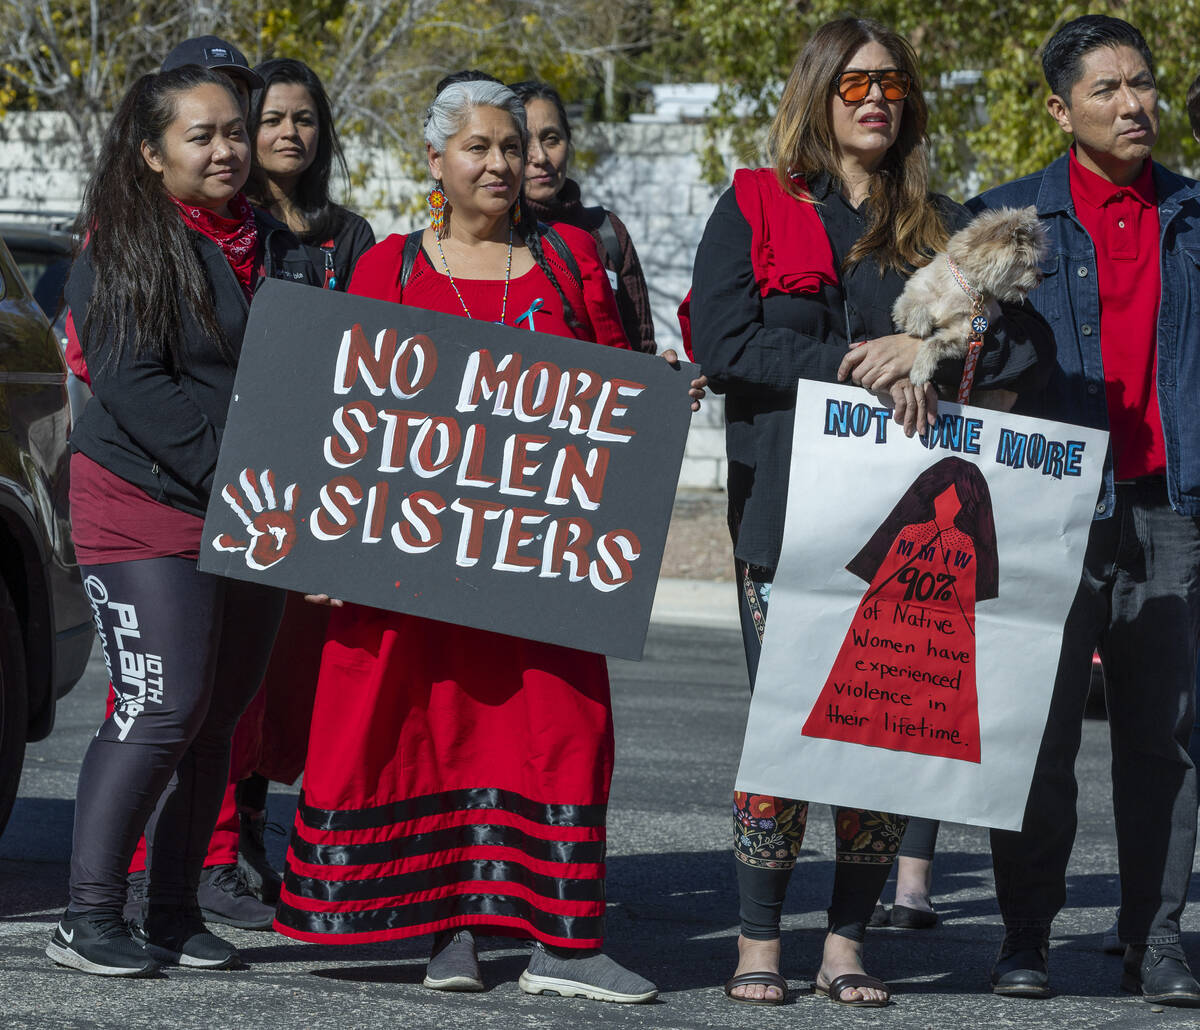 Members of the Native community and allies gather in solidarity as the numbers of abused indige ...